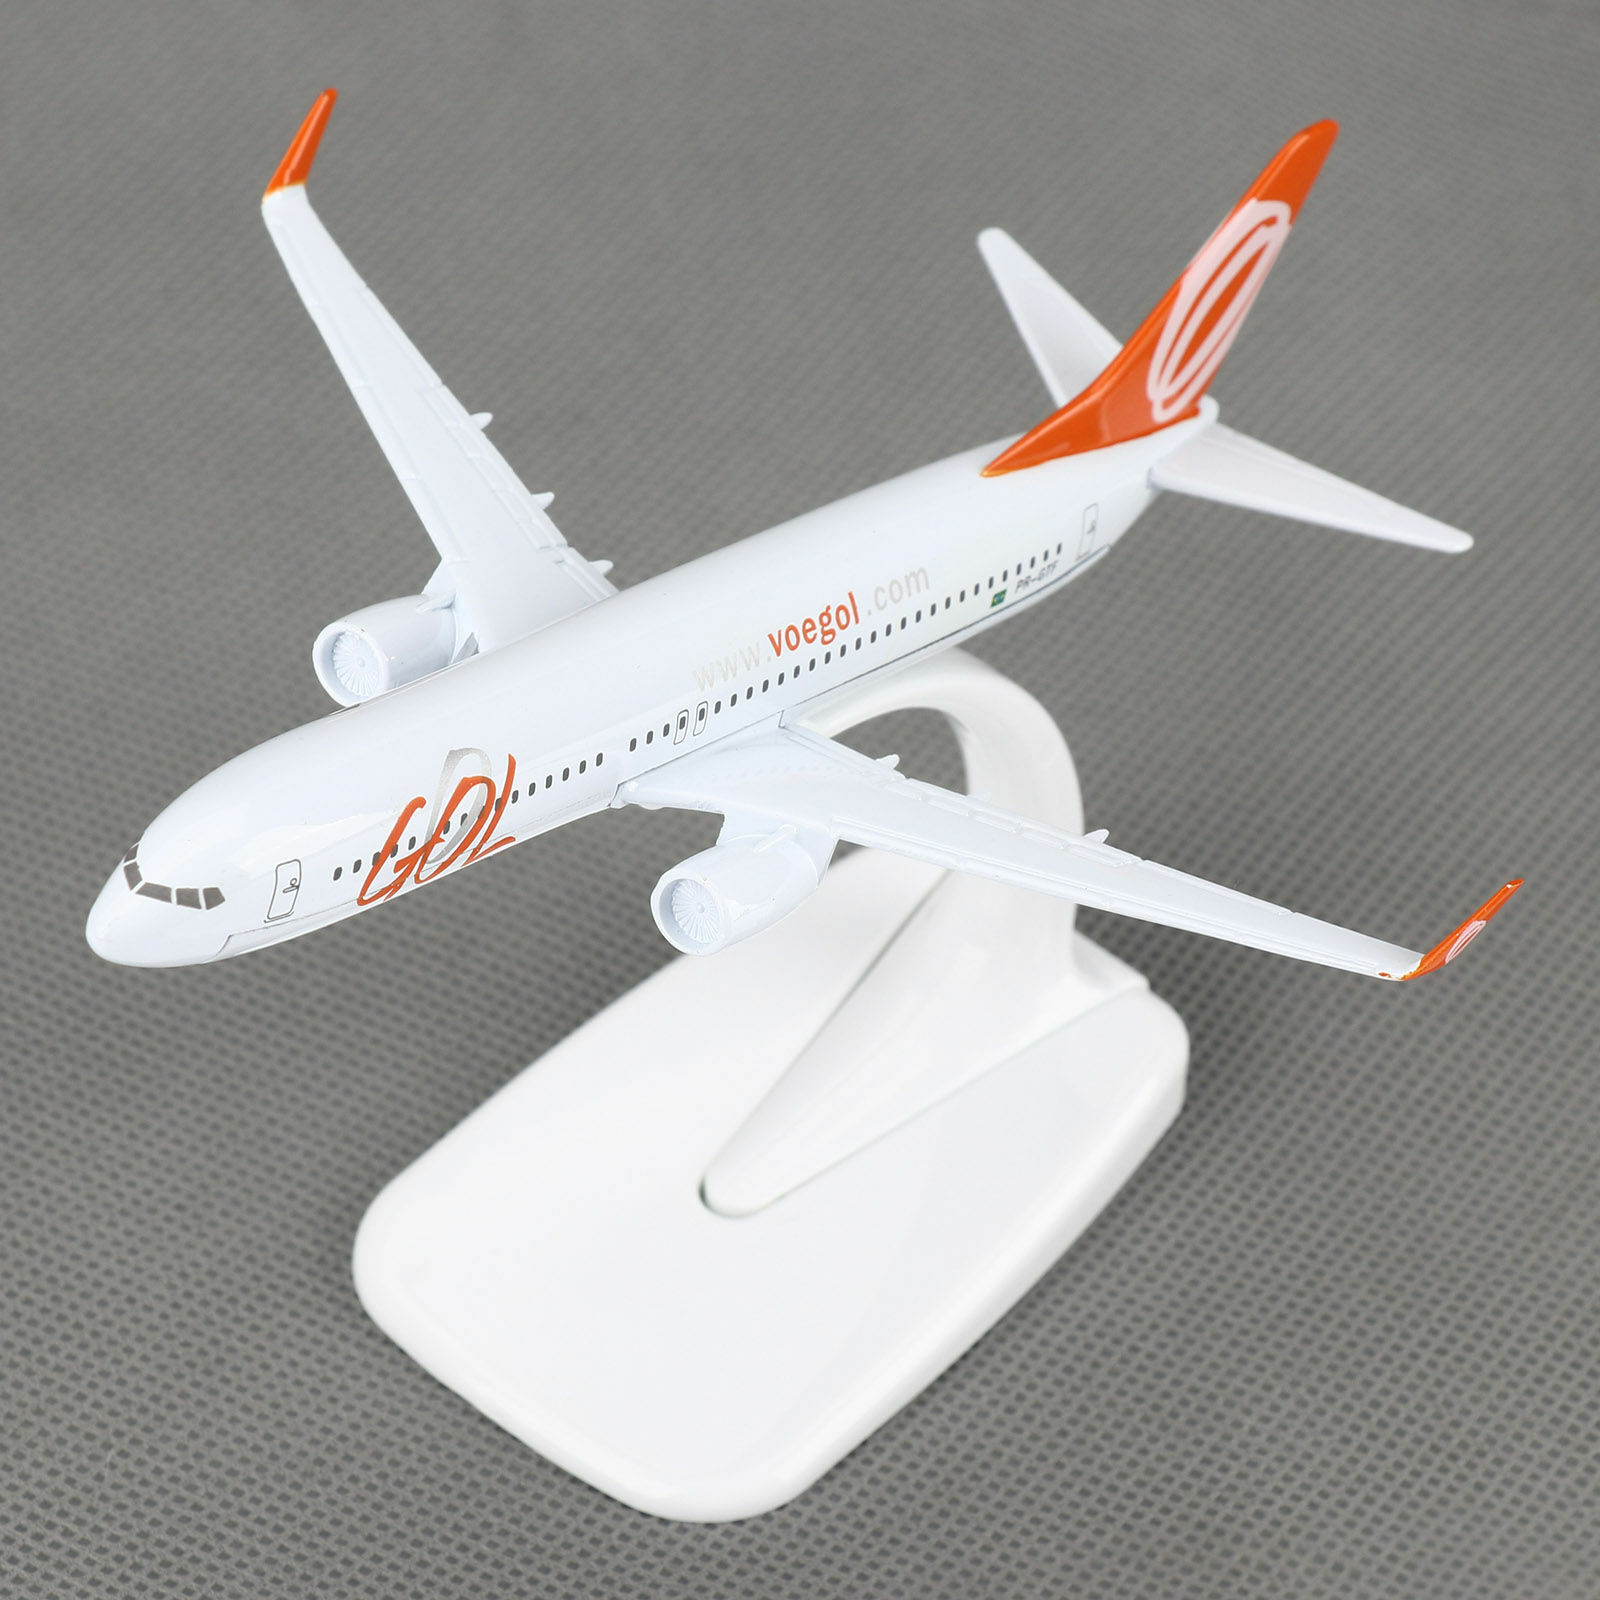 New 16cm Aircraft Plane Boeing 737 Air GOL Airlines Diecast Model